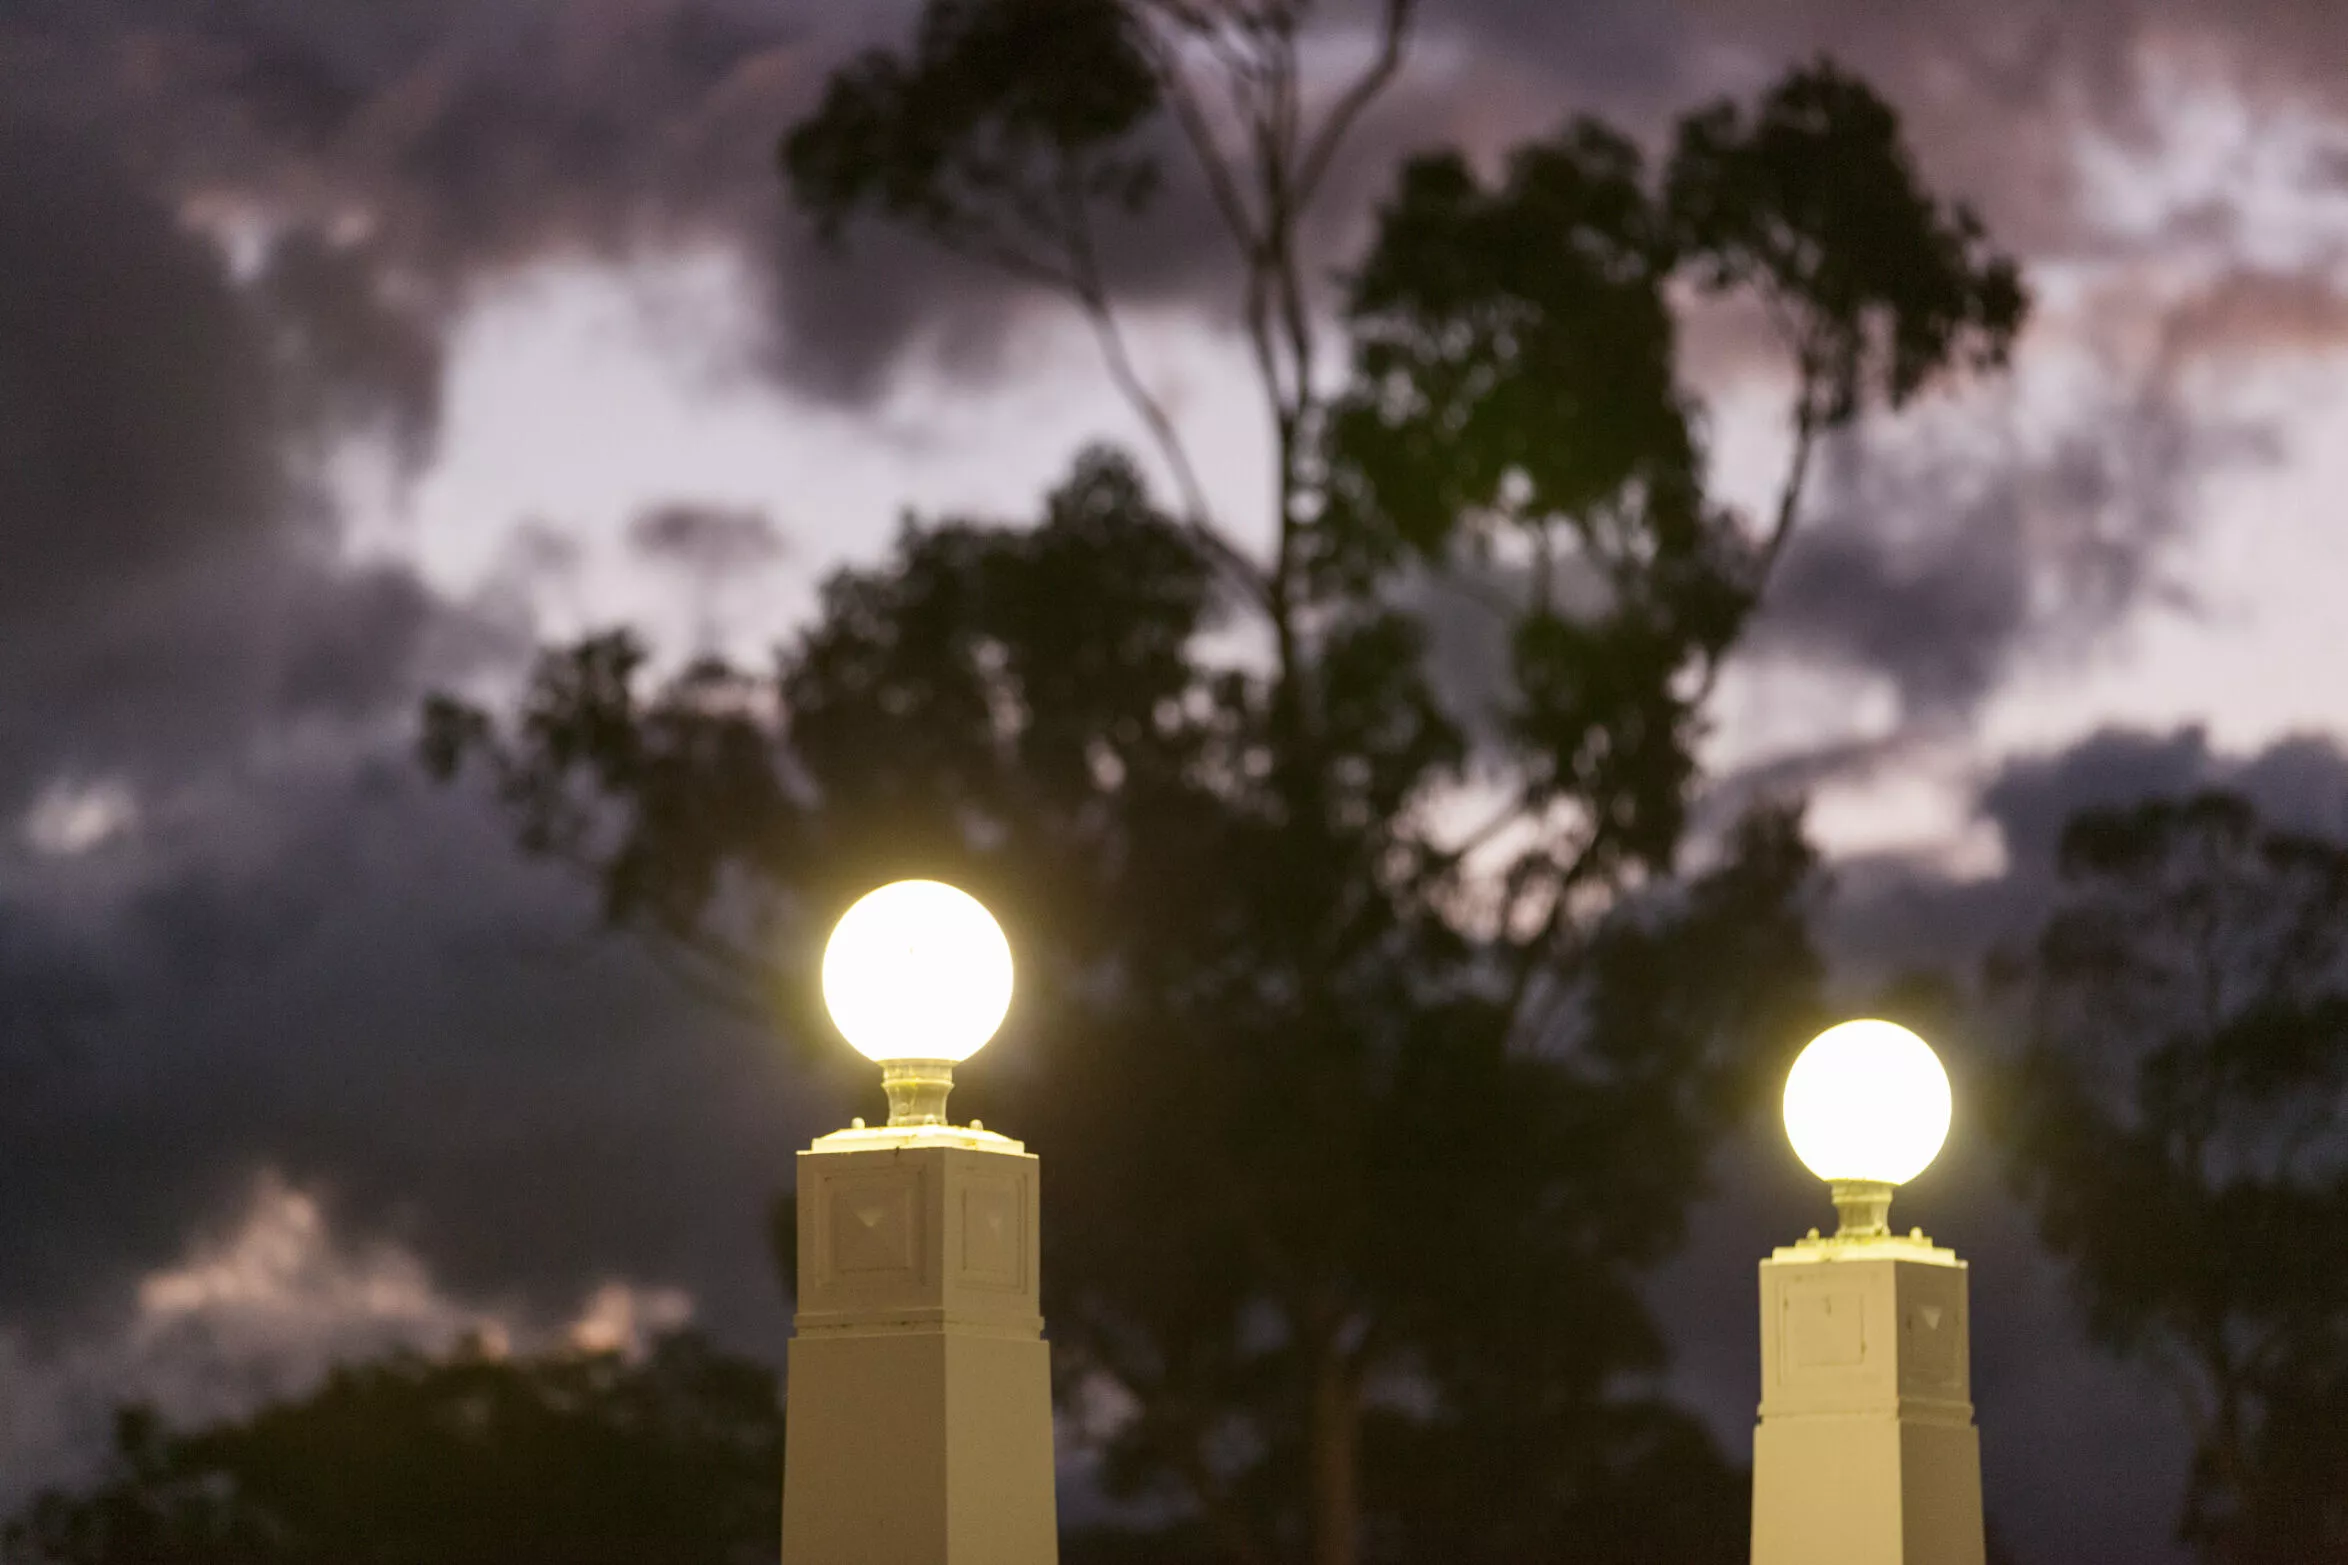 Two bright lights on pedestals with the night sky and a tree in the background.